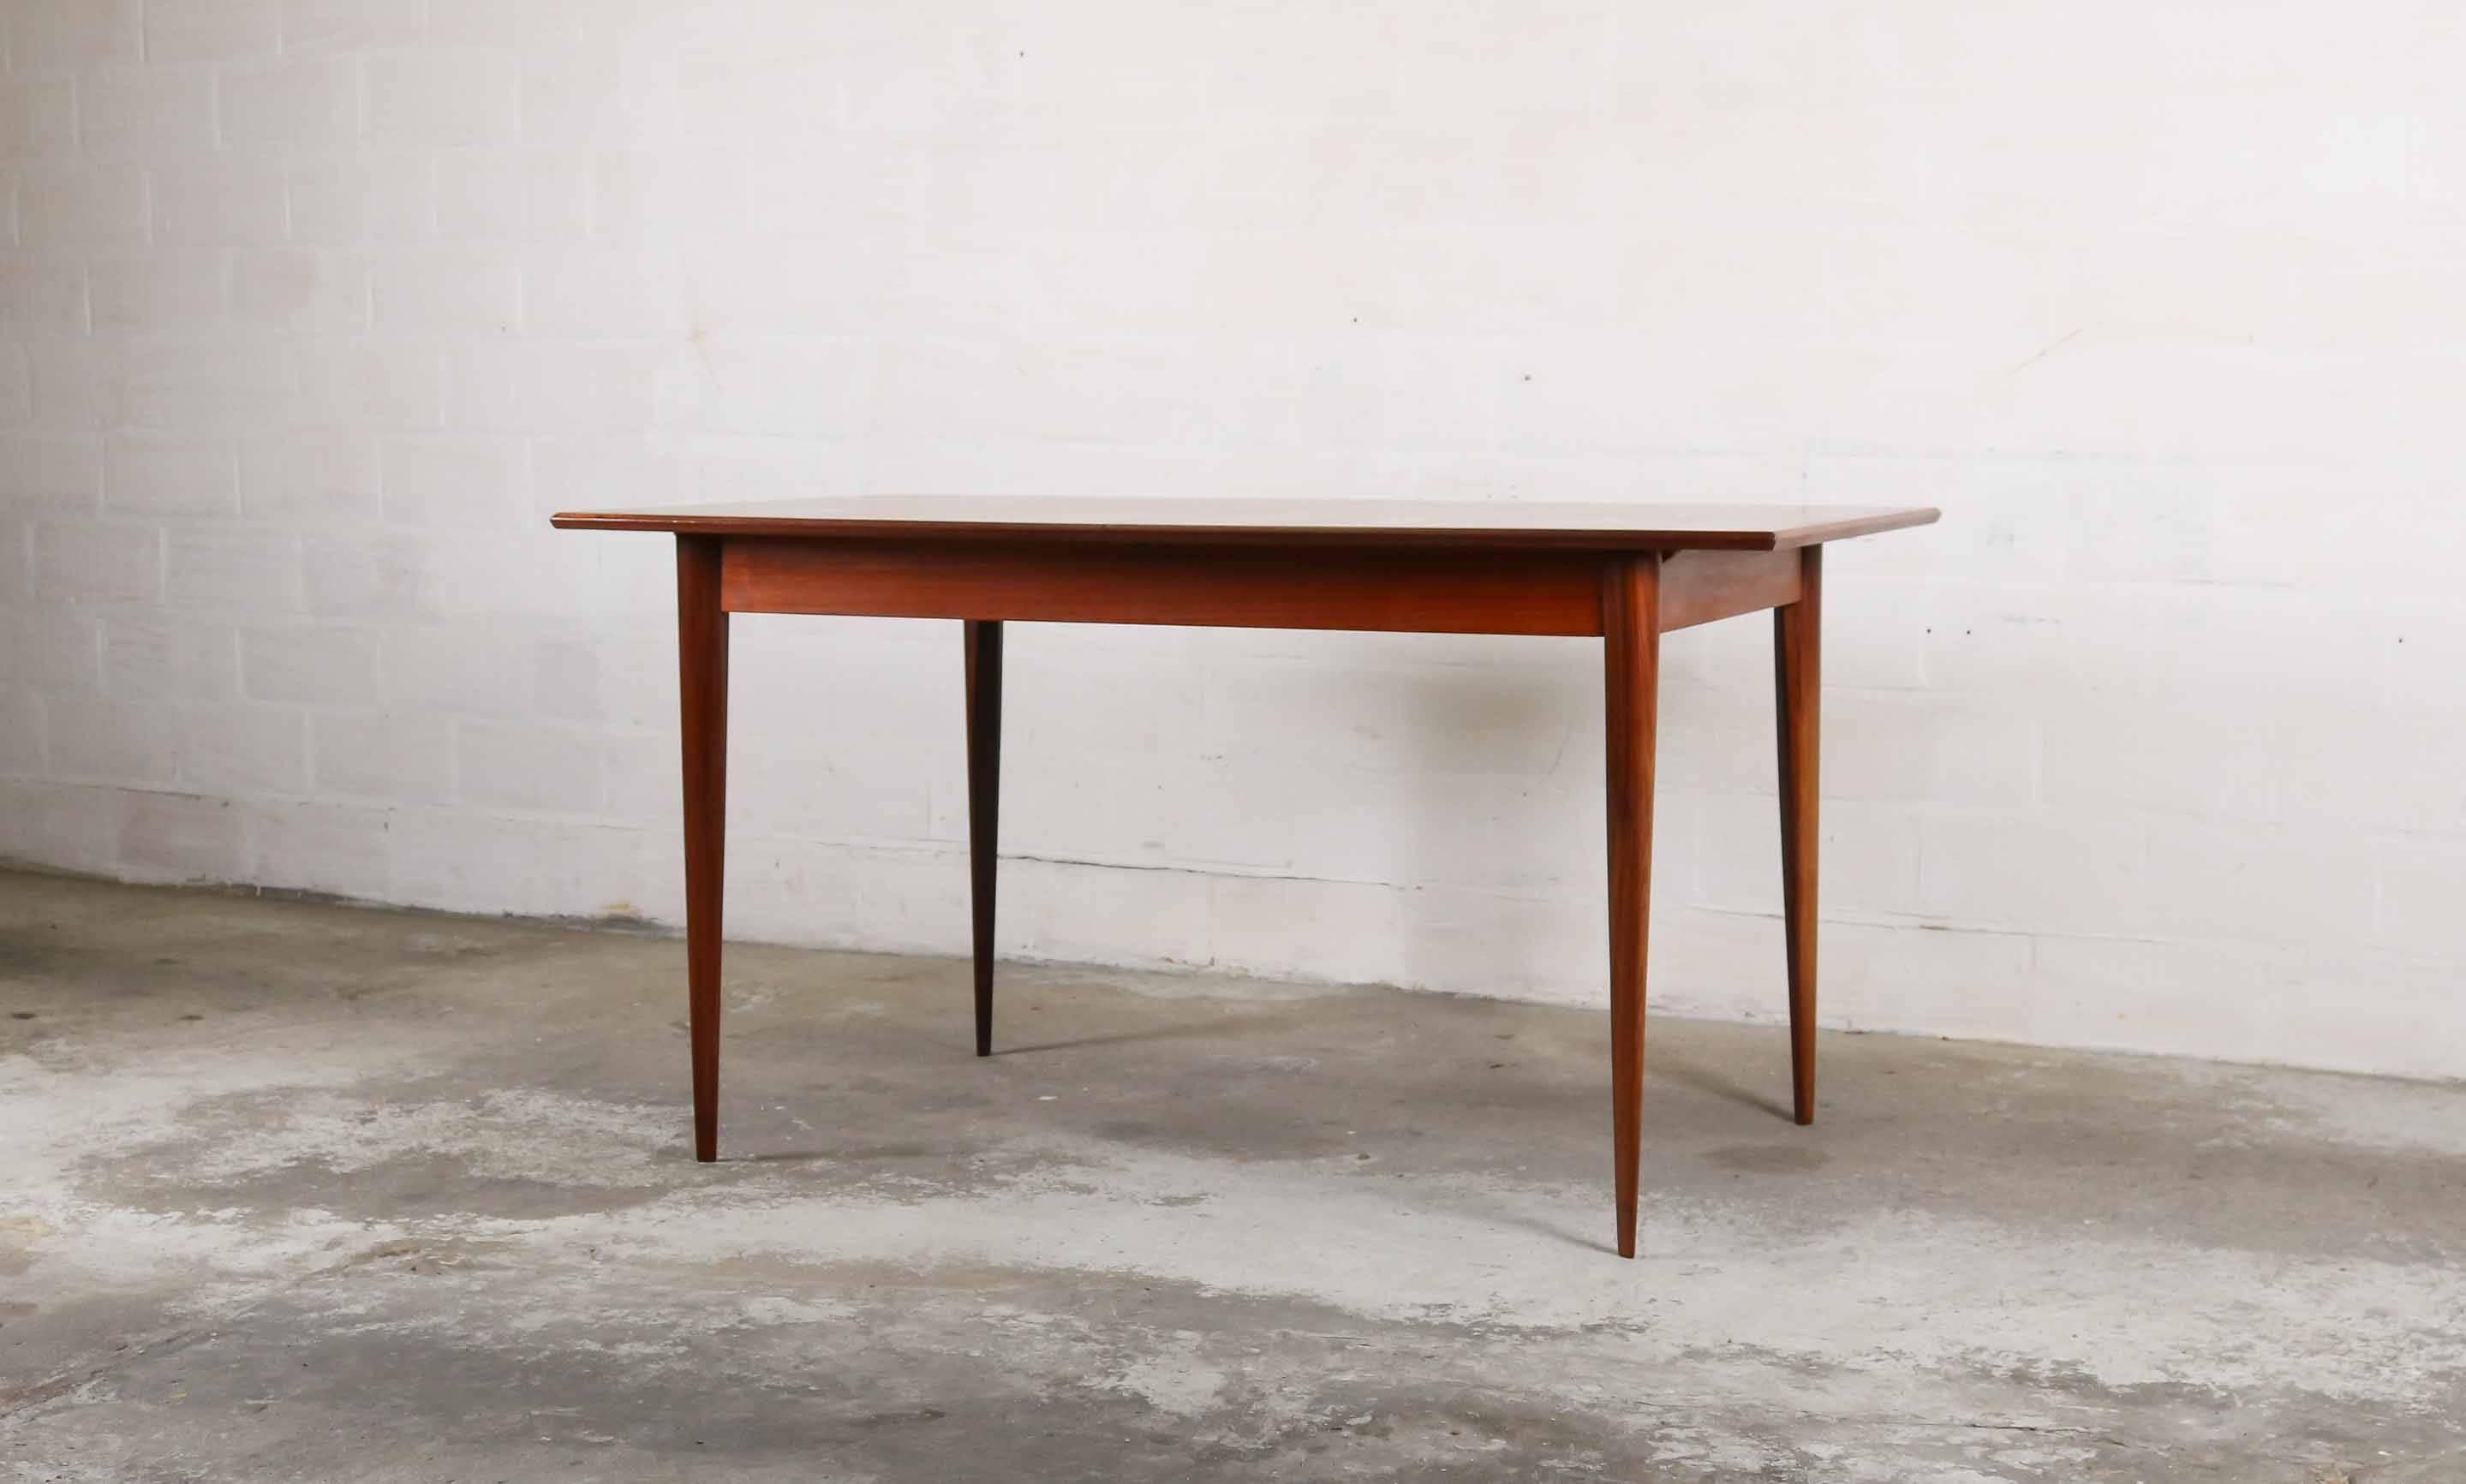 Table of Belgian designer Oswald Vermaercke for V-form.
Made from teak wood. The table can be extended (measure: width 140-190 cm).

 